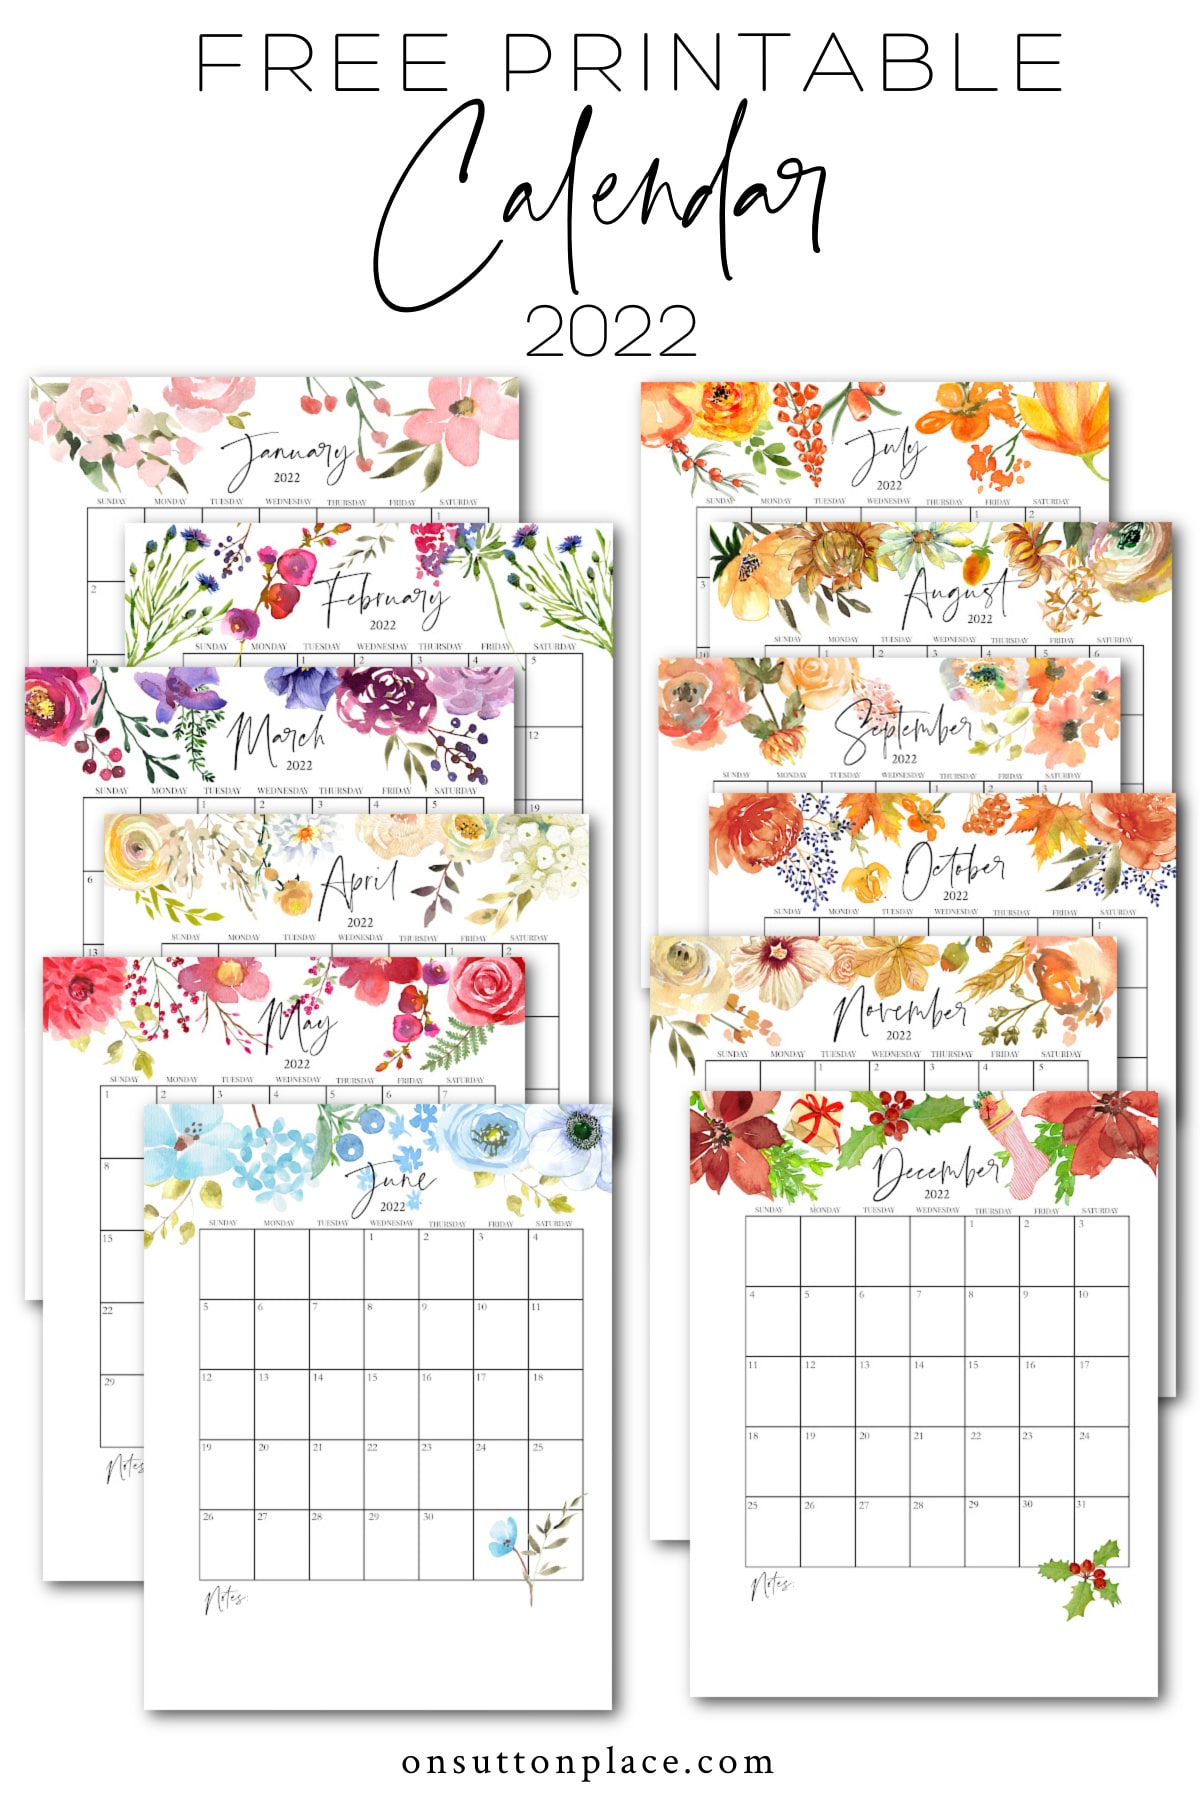 Free Cute Printable 2022 Monthly Calendar 50+ Of The Best 2022 Free Printable Calendars - The Turquoise Home